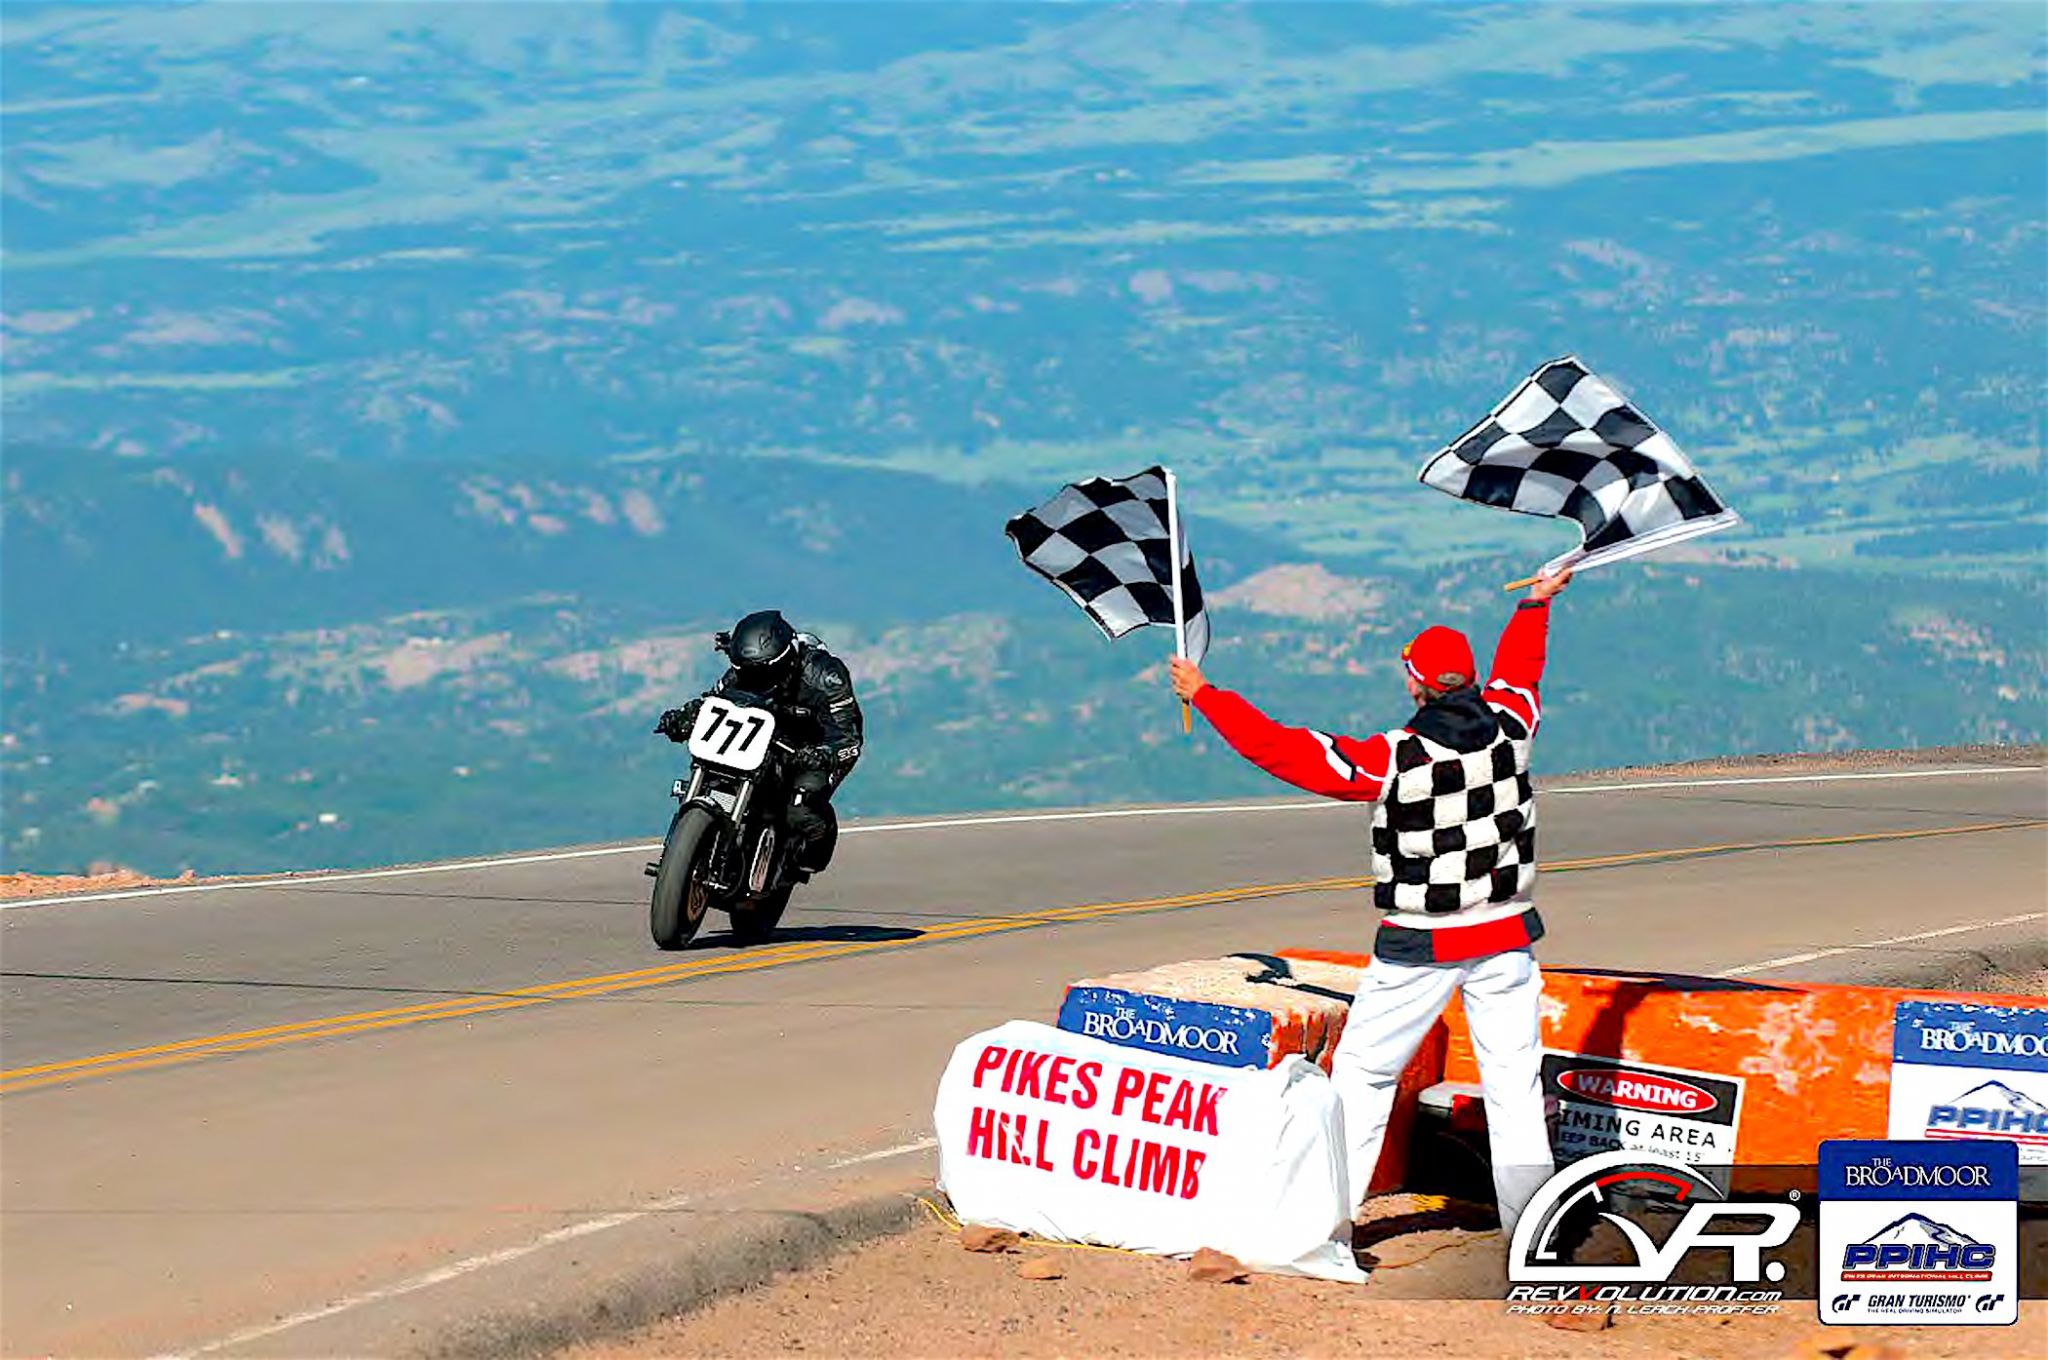 Electric Motorcycles to Race Pikes Peak at the 100th Anniversary of the Hill Climb